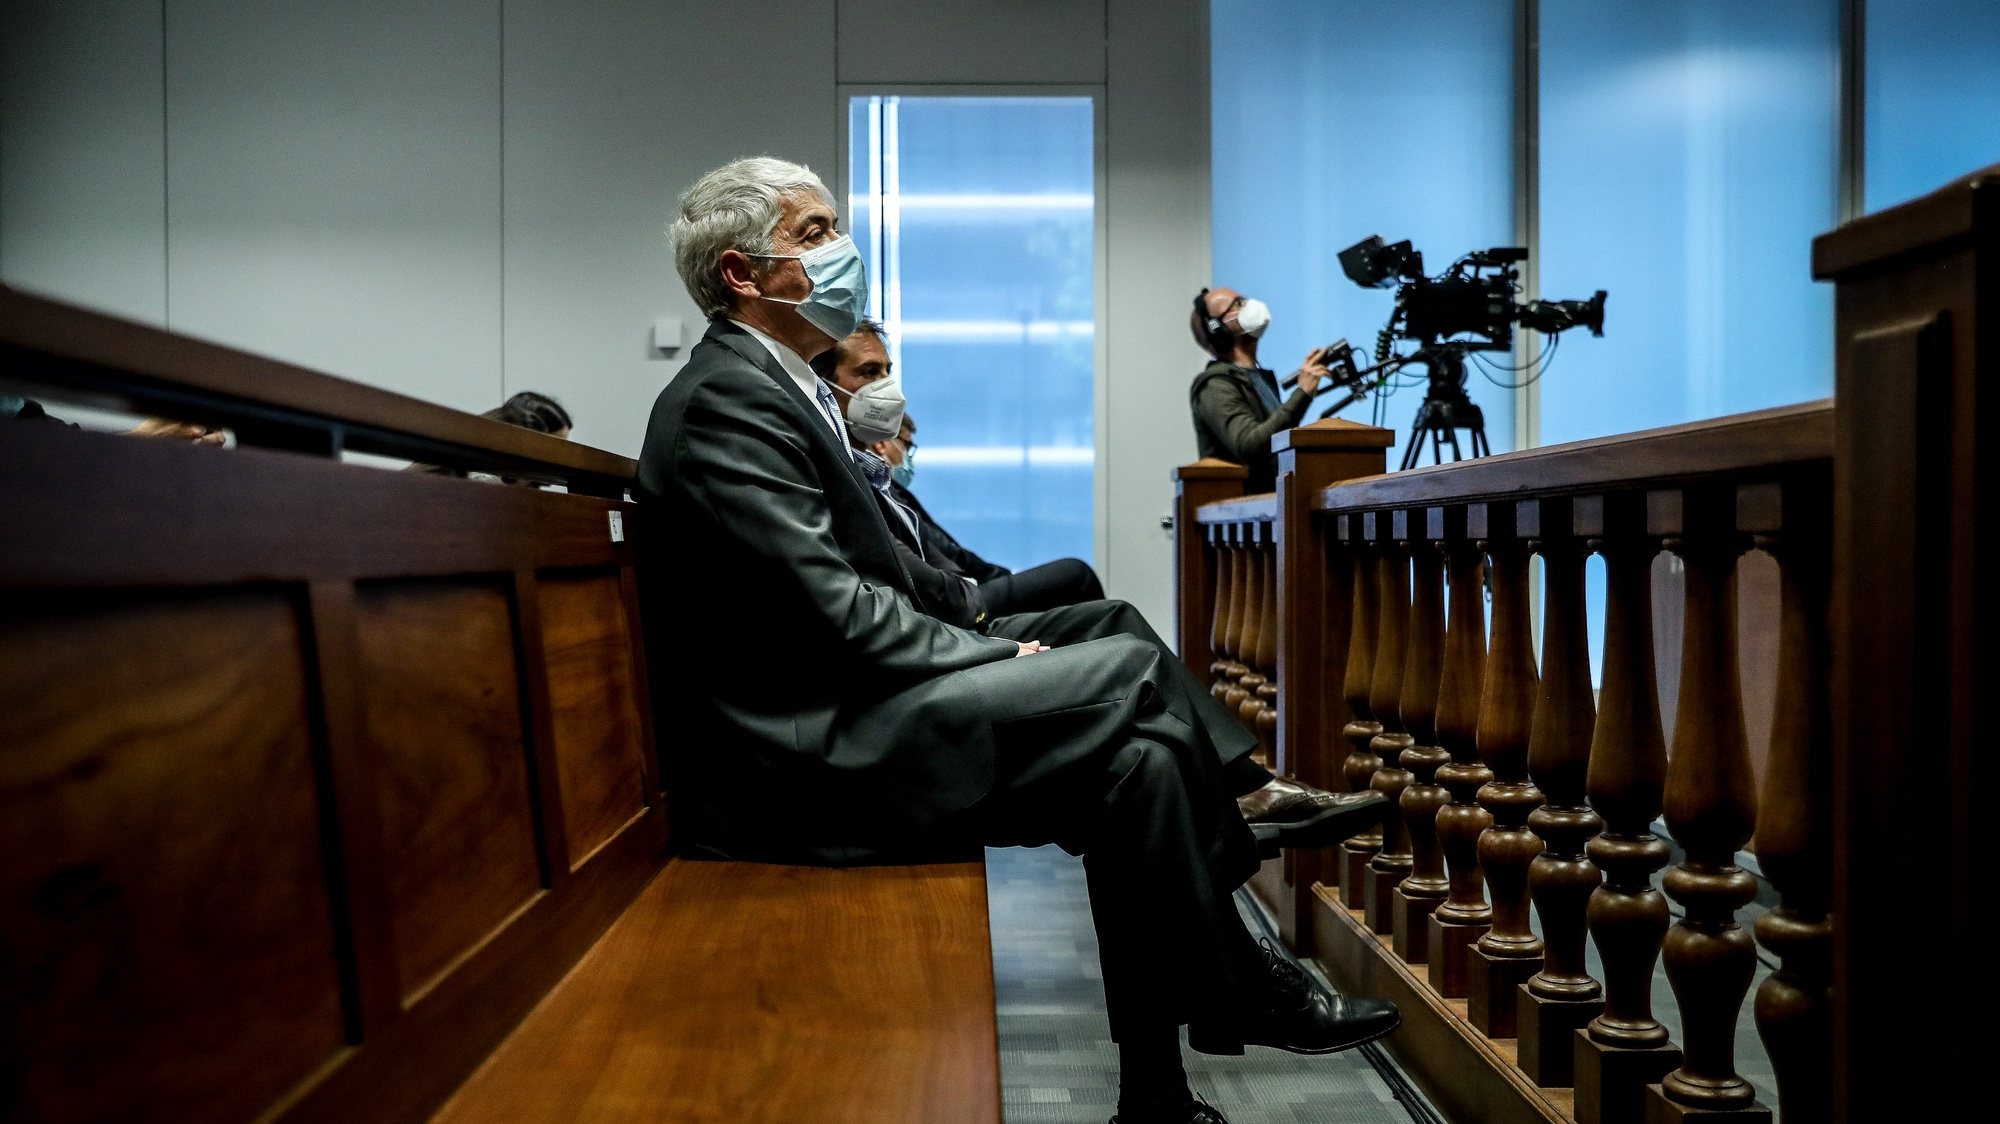 The defendant and former Prime Minister Jose Socrates during the reading of the instructional decision of the high-profile corruption case known as Operation Marques, at the Justice Campus in Lisbon, Portugal, 09 April 2021. Operation Marques has 28 defendants - 19 people and 9 companies - including former Prime Minister Jose Socrates, banker Ricardo Salgado, businessman and friend of Socrates Carlos Santos Silva, and senior executives of Portugal Telecom, and is related to crimes of active and passive corruption, money laundering, document forgery, and tax fraud.  MARIO CRUZ/POOL/LUSA